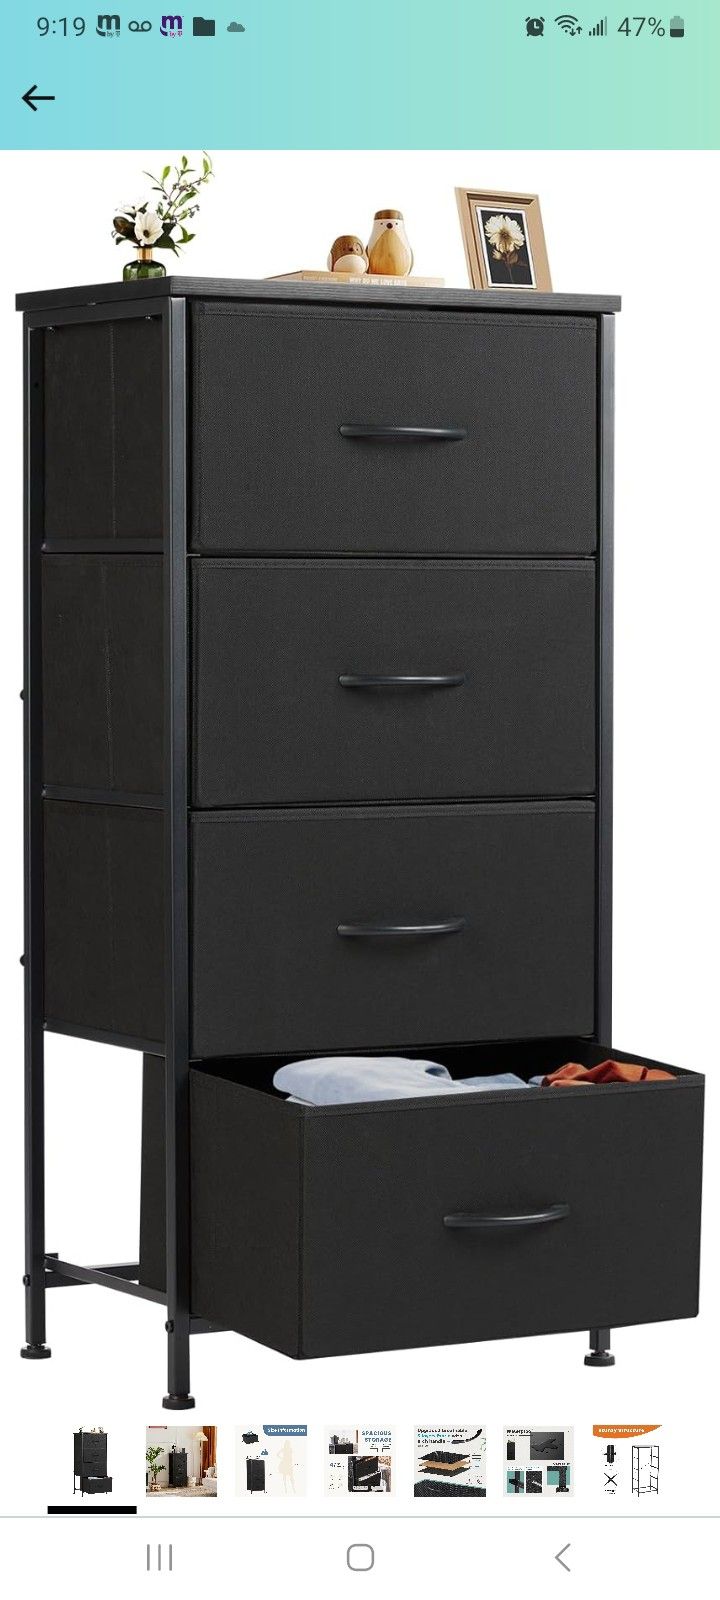 Fabric Dresser for Bedroom, Chest of Storage with Wooden Top, Closet Organizer for Living Room Hallway Entryway, 4-Drawers, Black

